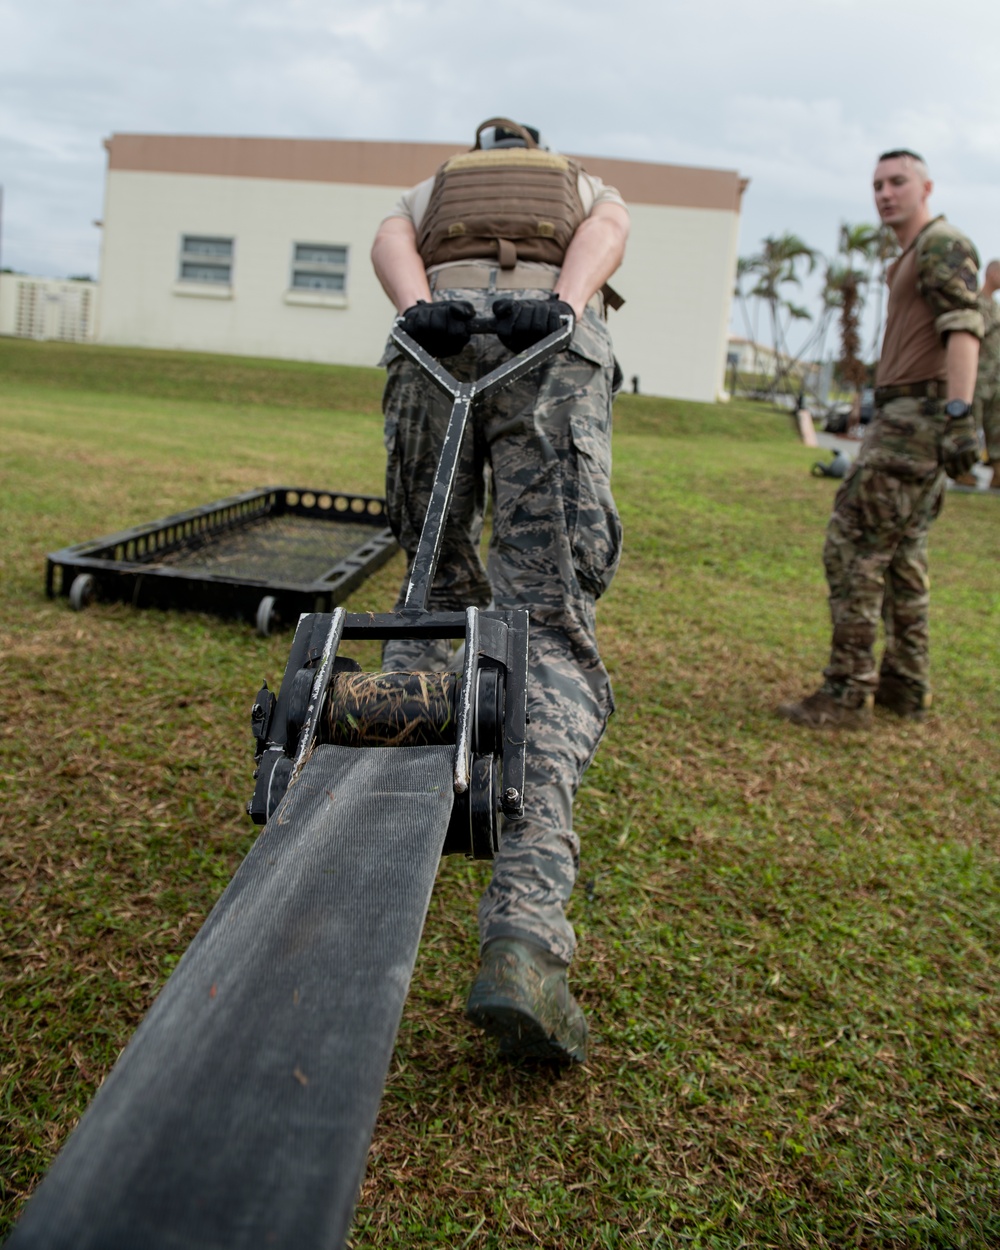 FARP Tryouts Test Airmen for Special Operations